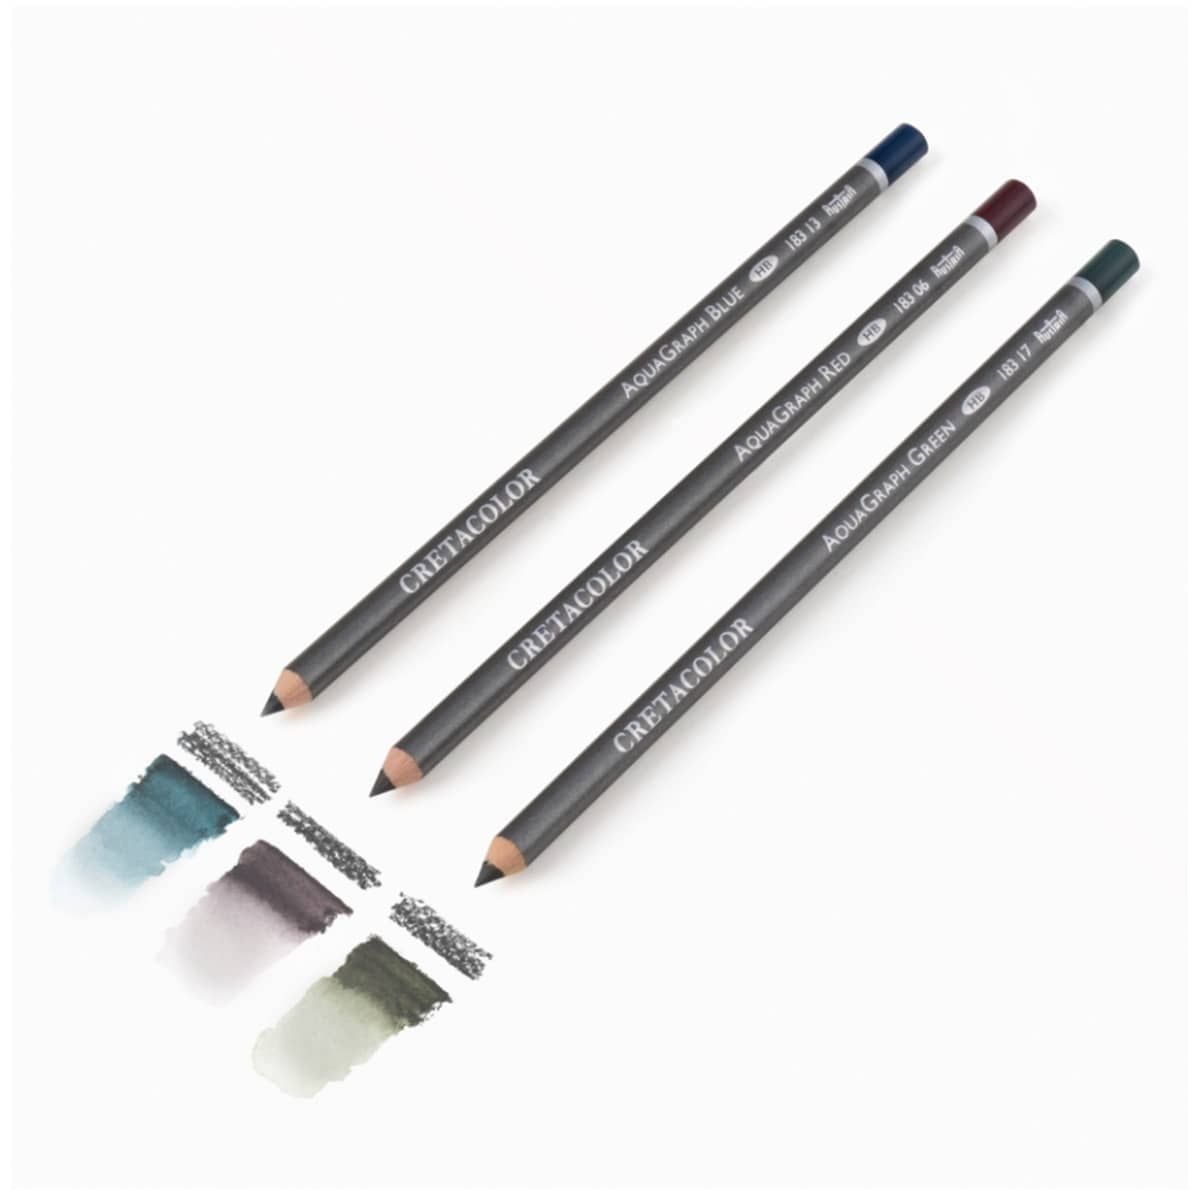 The new Aquagraph pencils are available in the colors Red, Blue, and Green